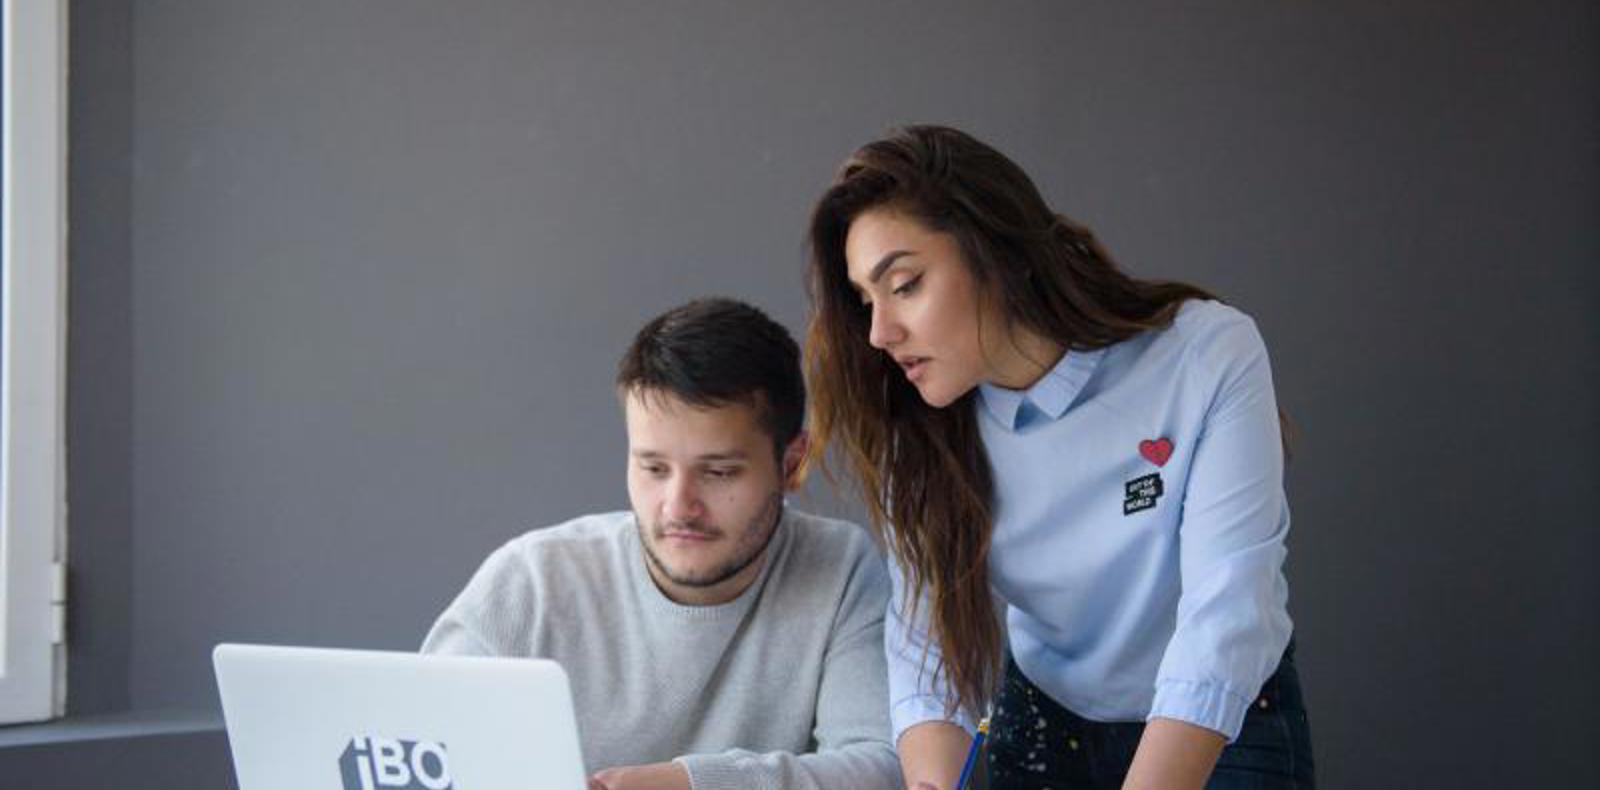 A man and woman collaborating on a laptop, sharing ideas and working together to achieve their goals.